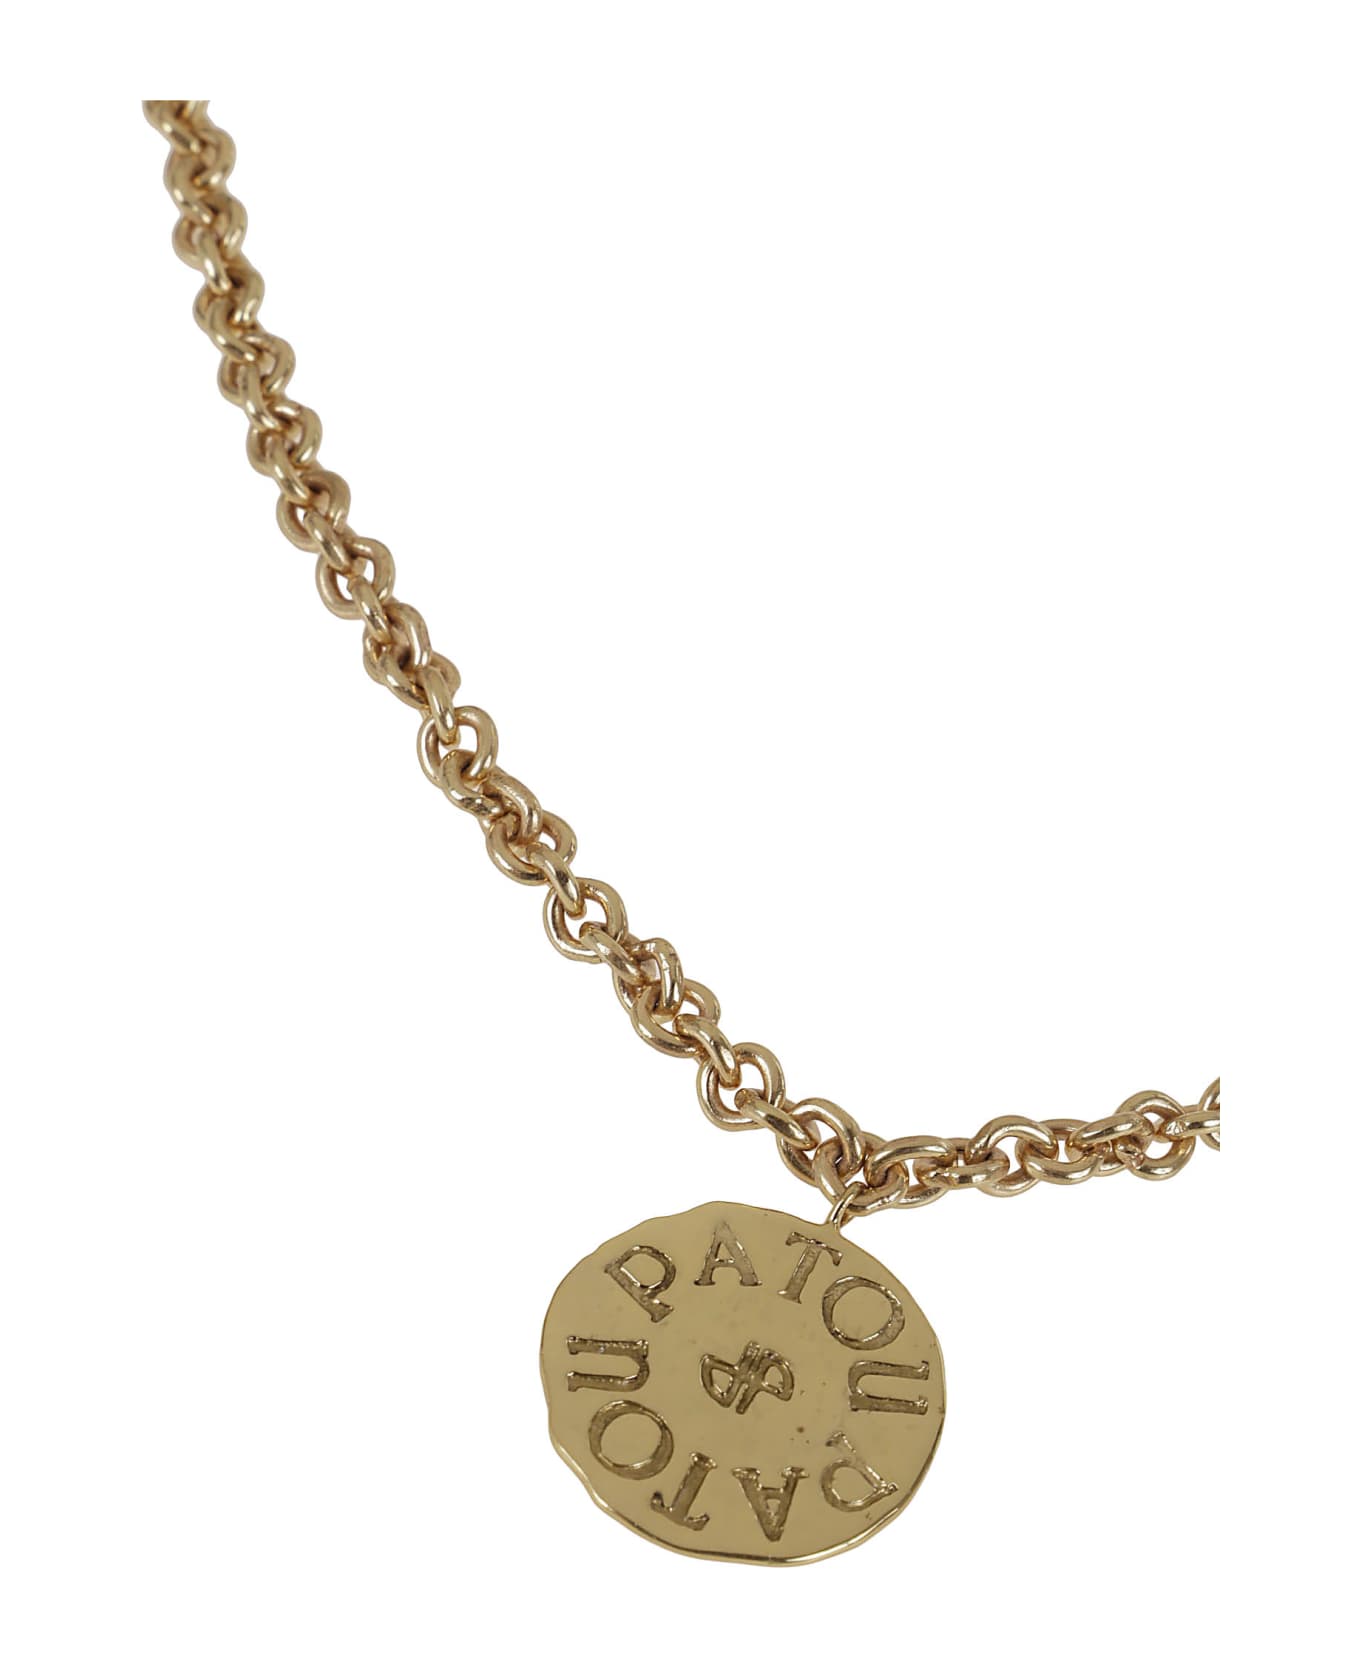 Patou Antique Coin Charm Necklace - G Gold ネックレス